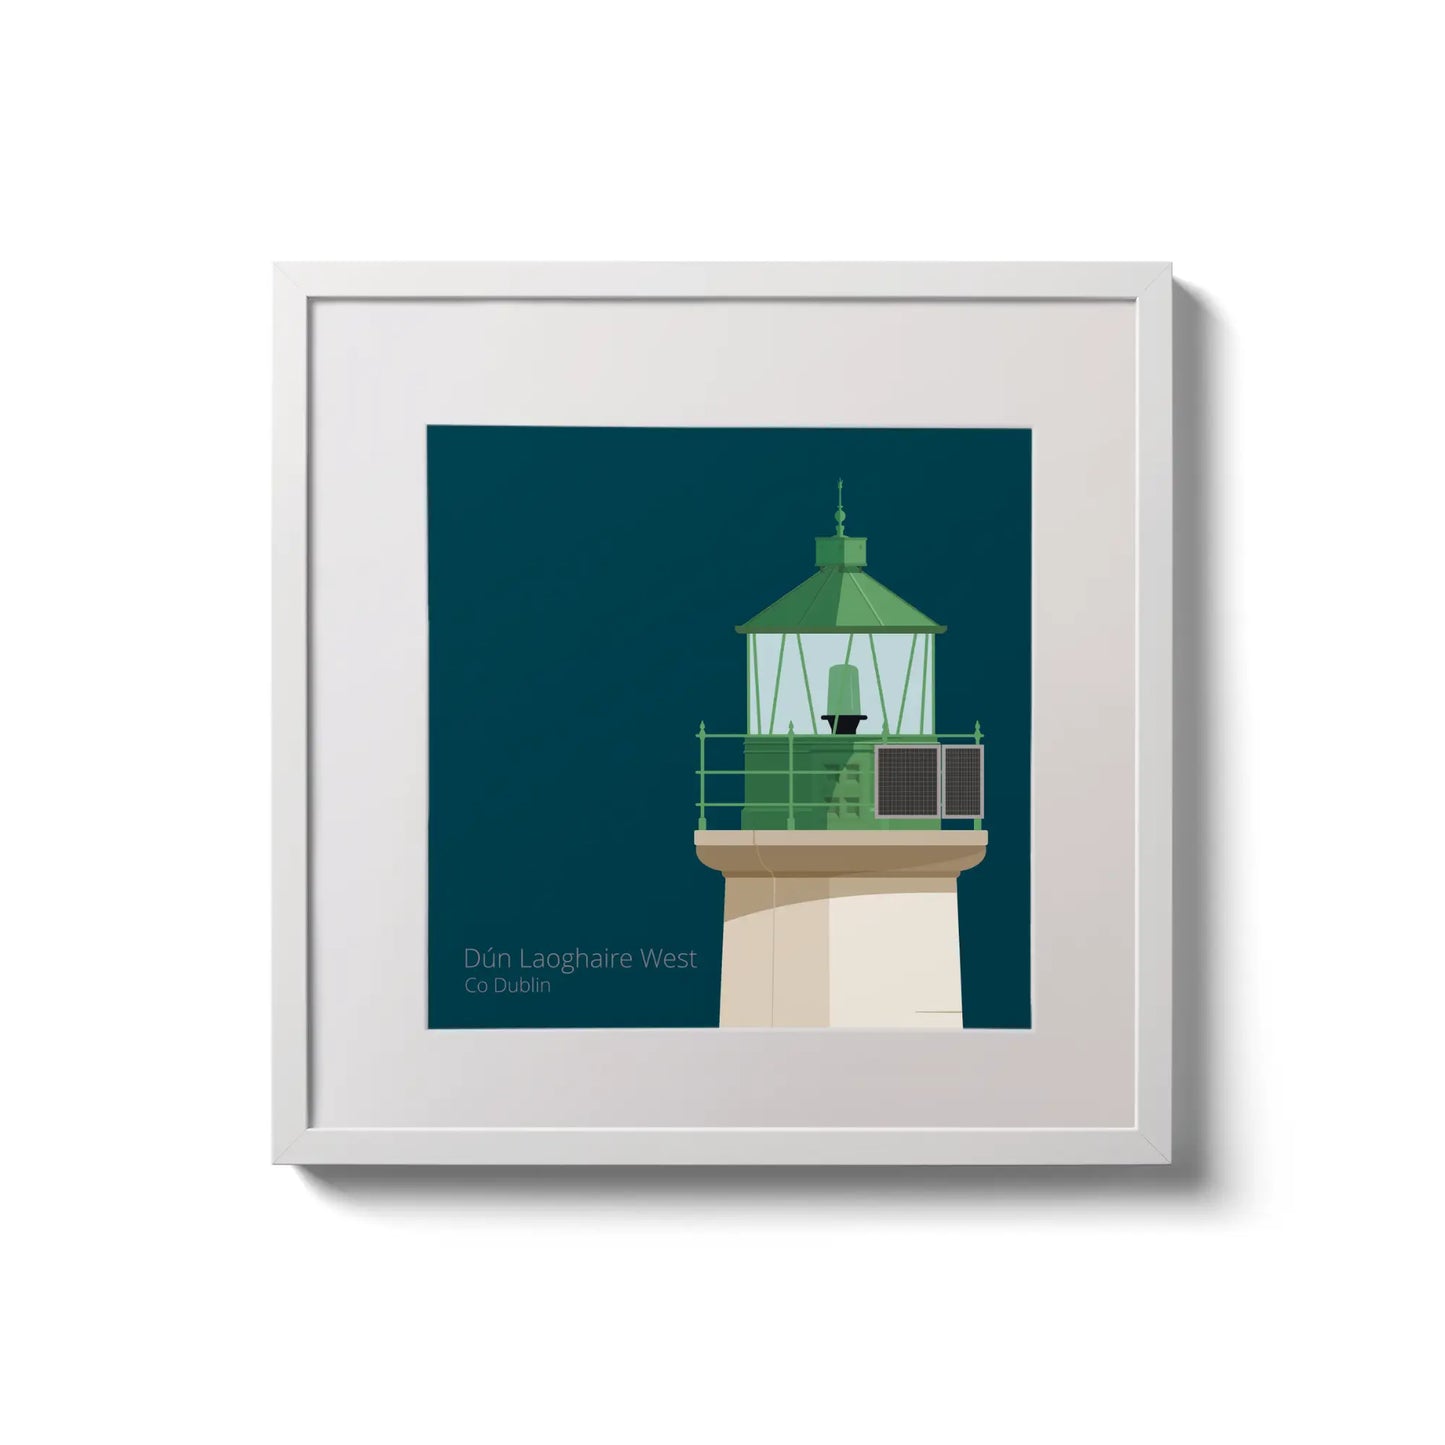 Illustration of Dún Laoghaire West lighthouse on a midnight blue background,  in a white square frame measuring 20x20cm.